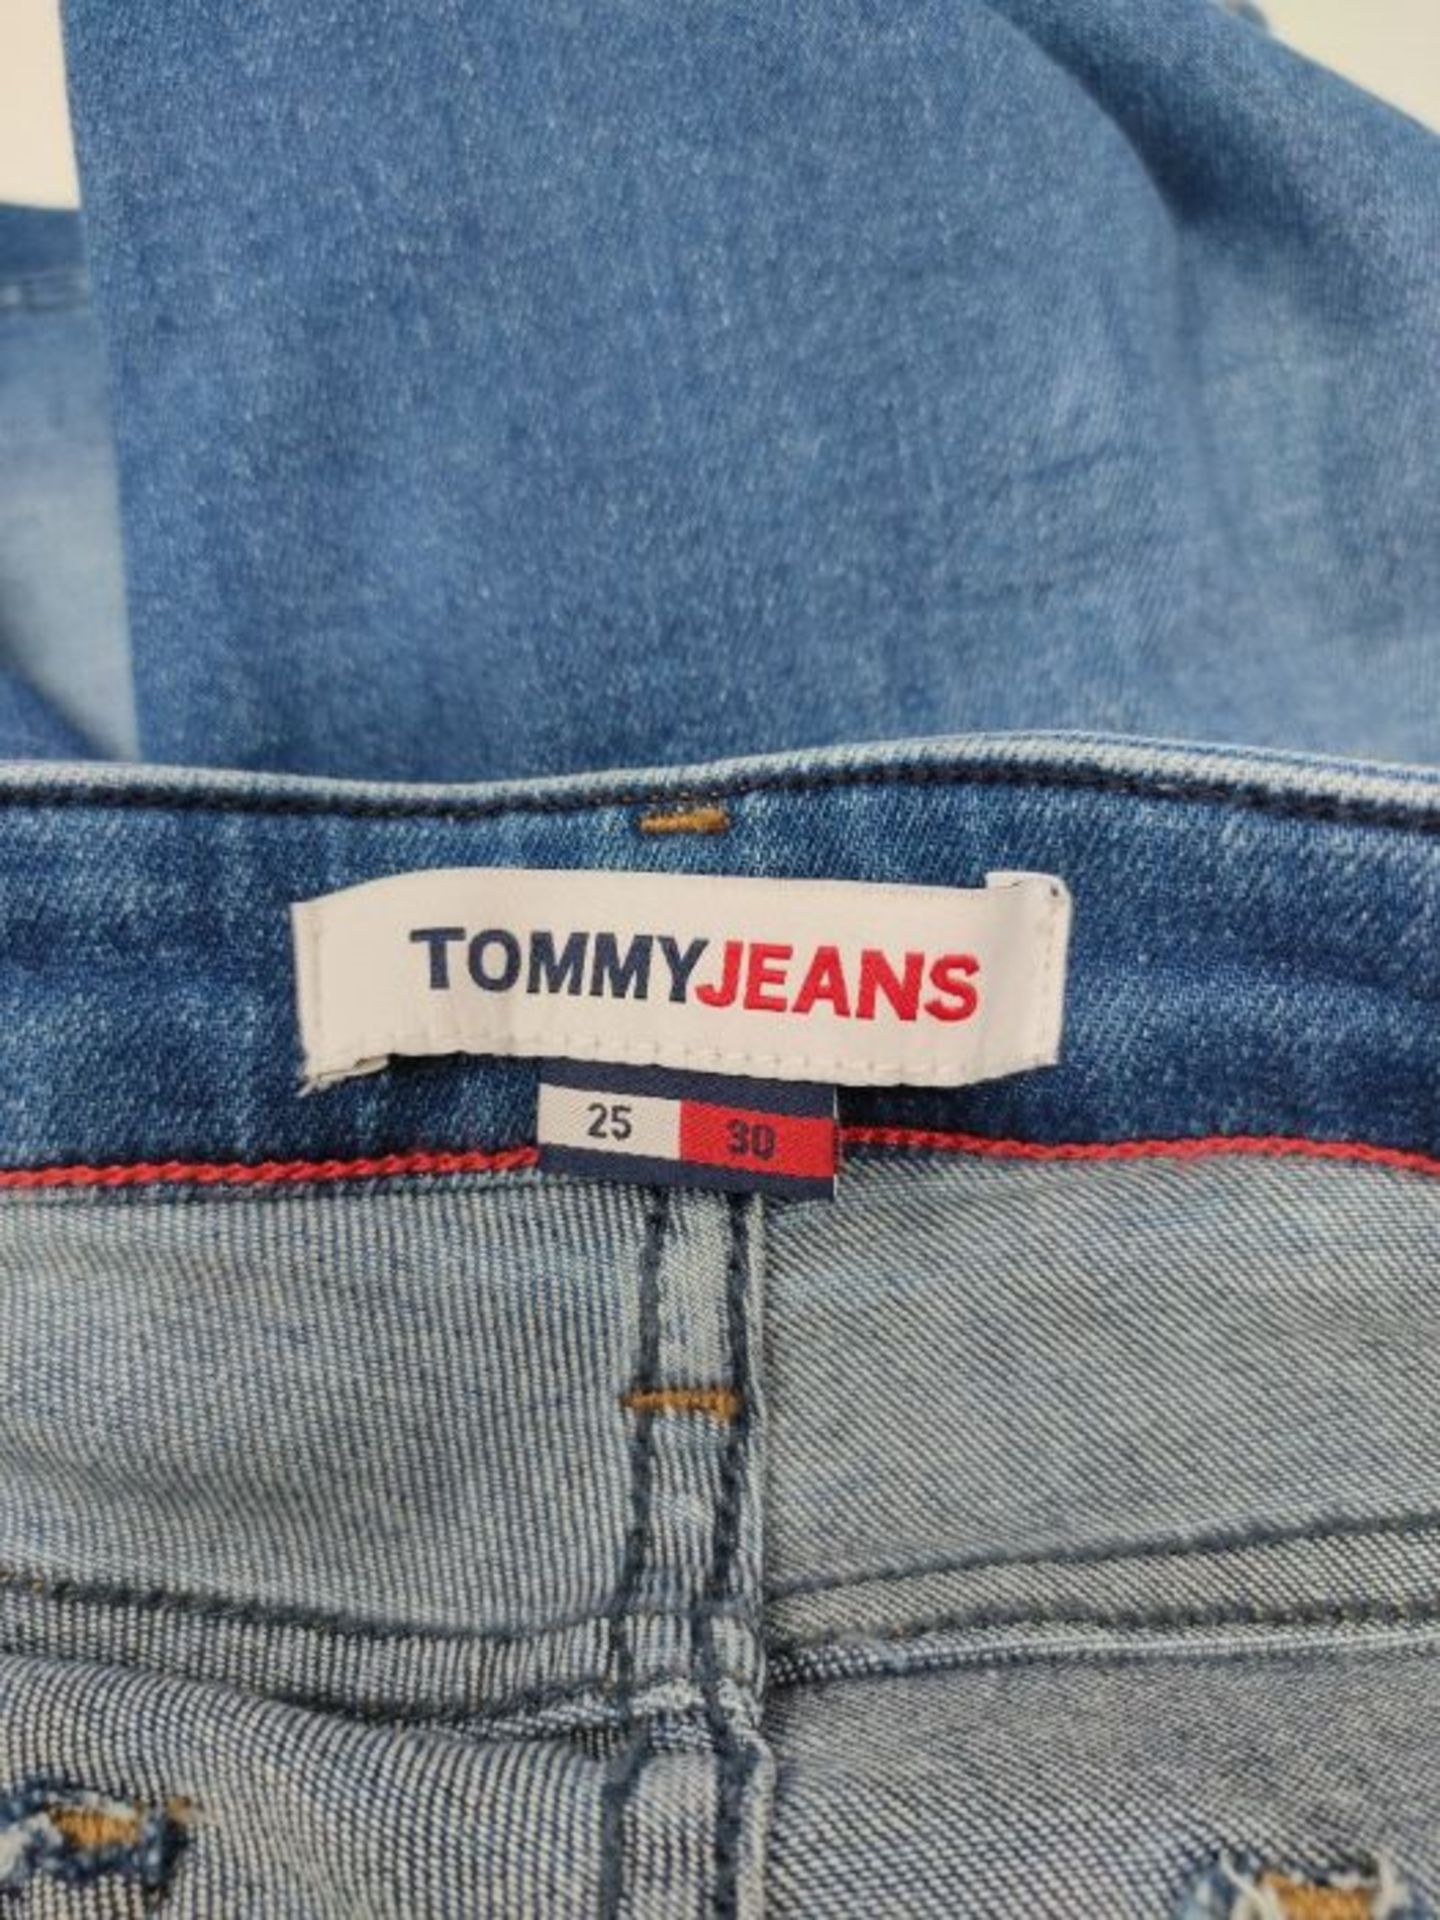 Tommy Jeans Women's Nora Mid Rise Skny Ankl Zip Mnm Straight Jeans, Blue (Denim A), W2 - Image 3 of 3